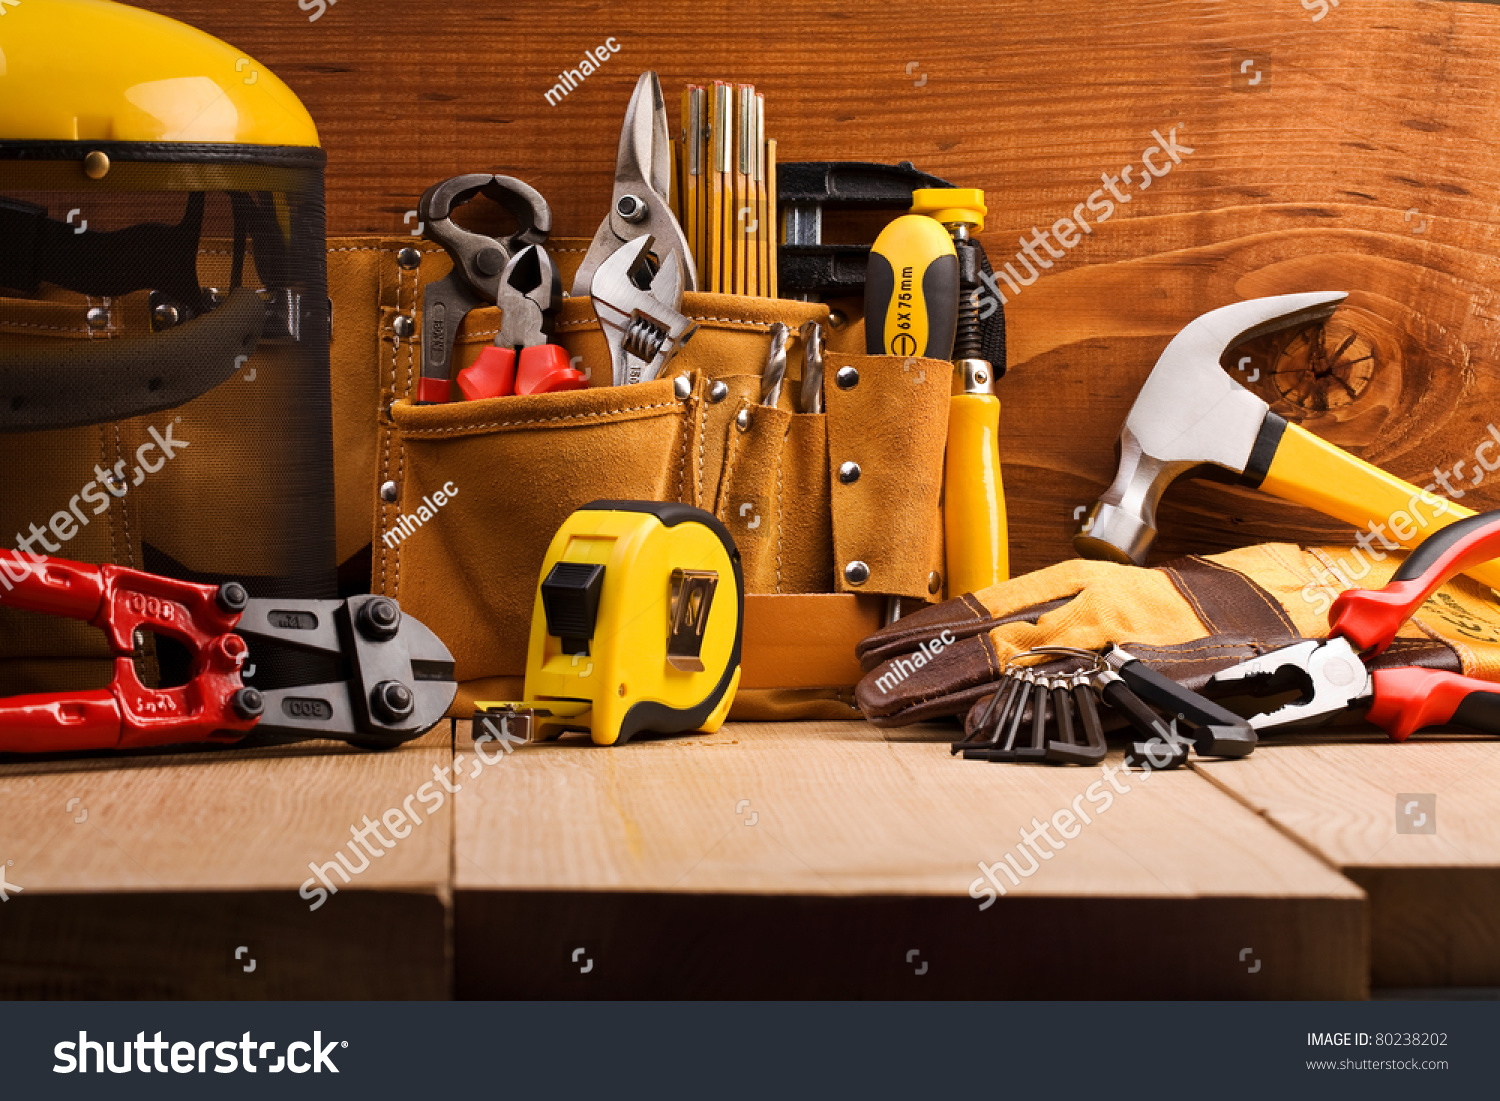 set of working tools on wooden boards #80238202